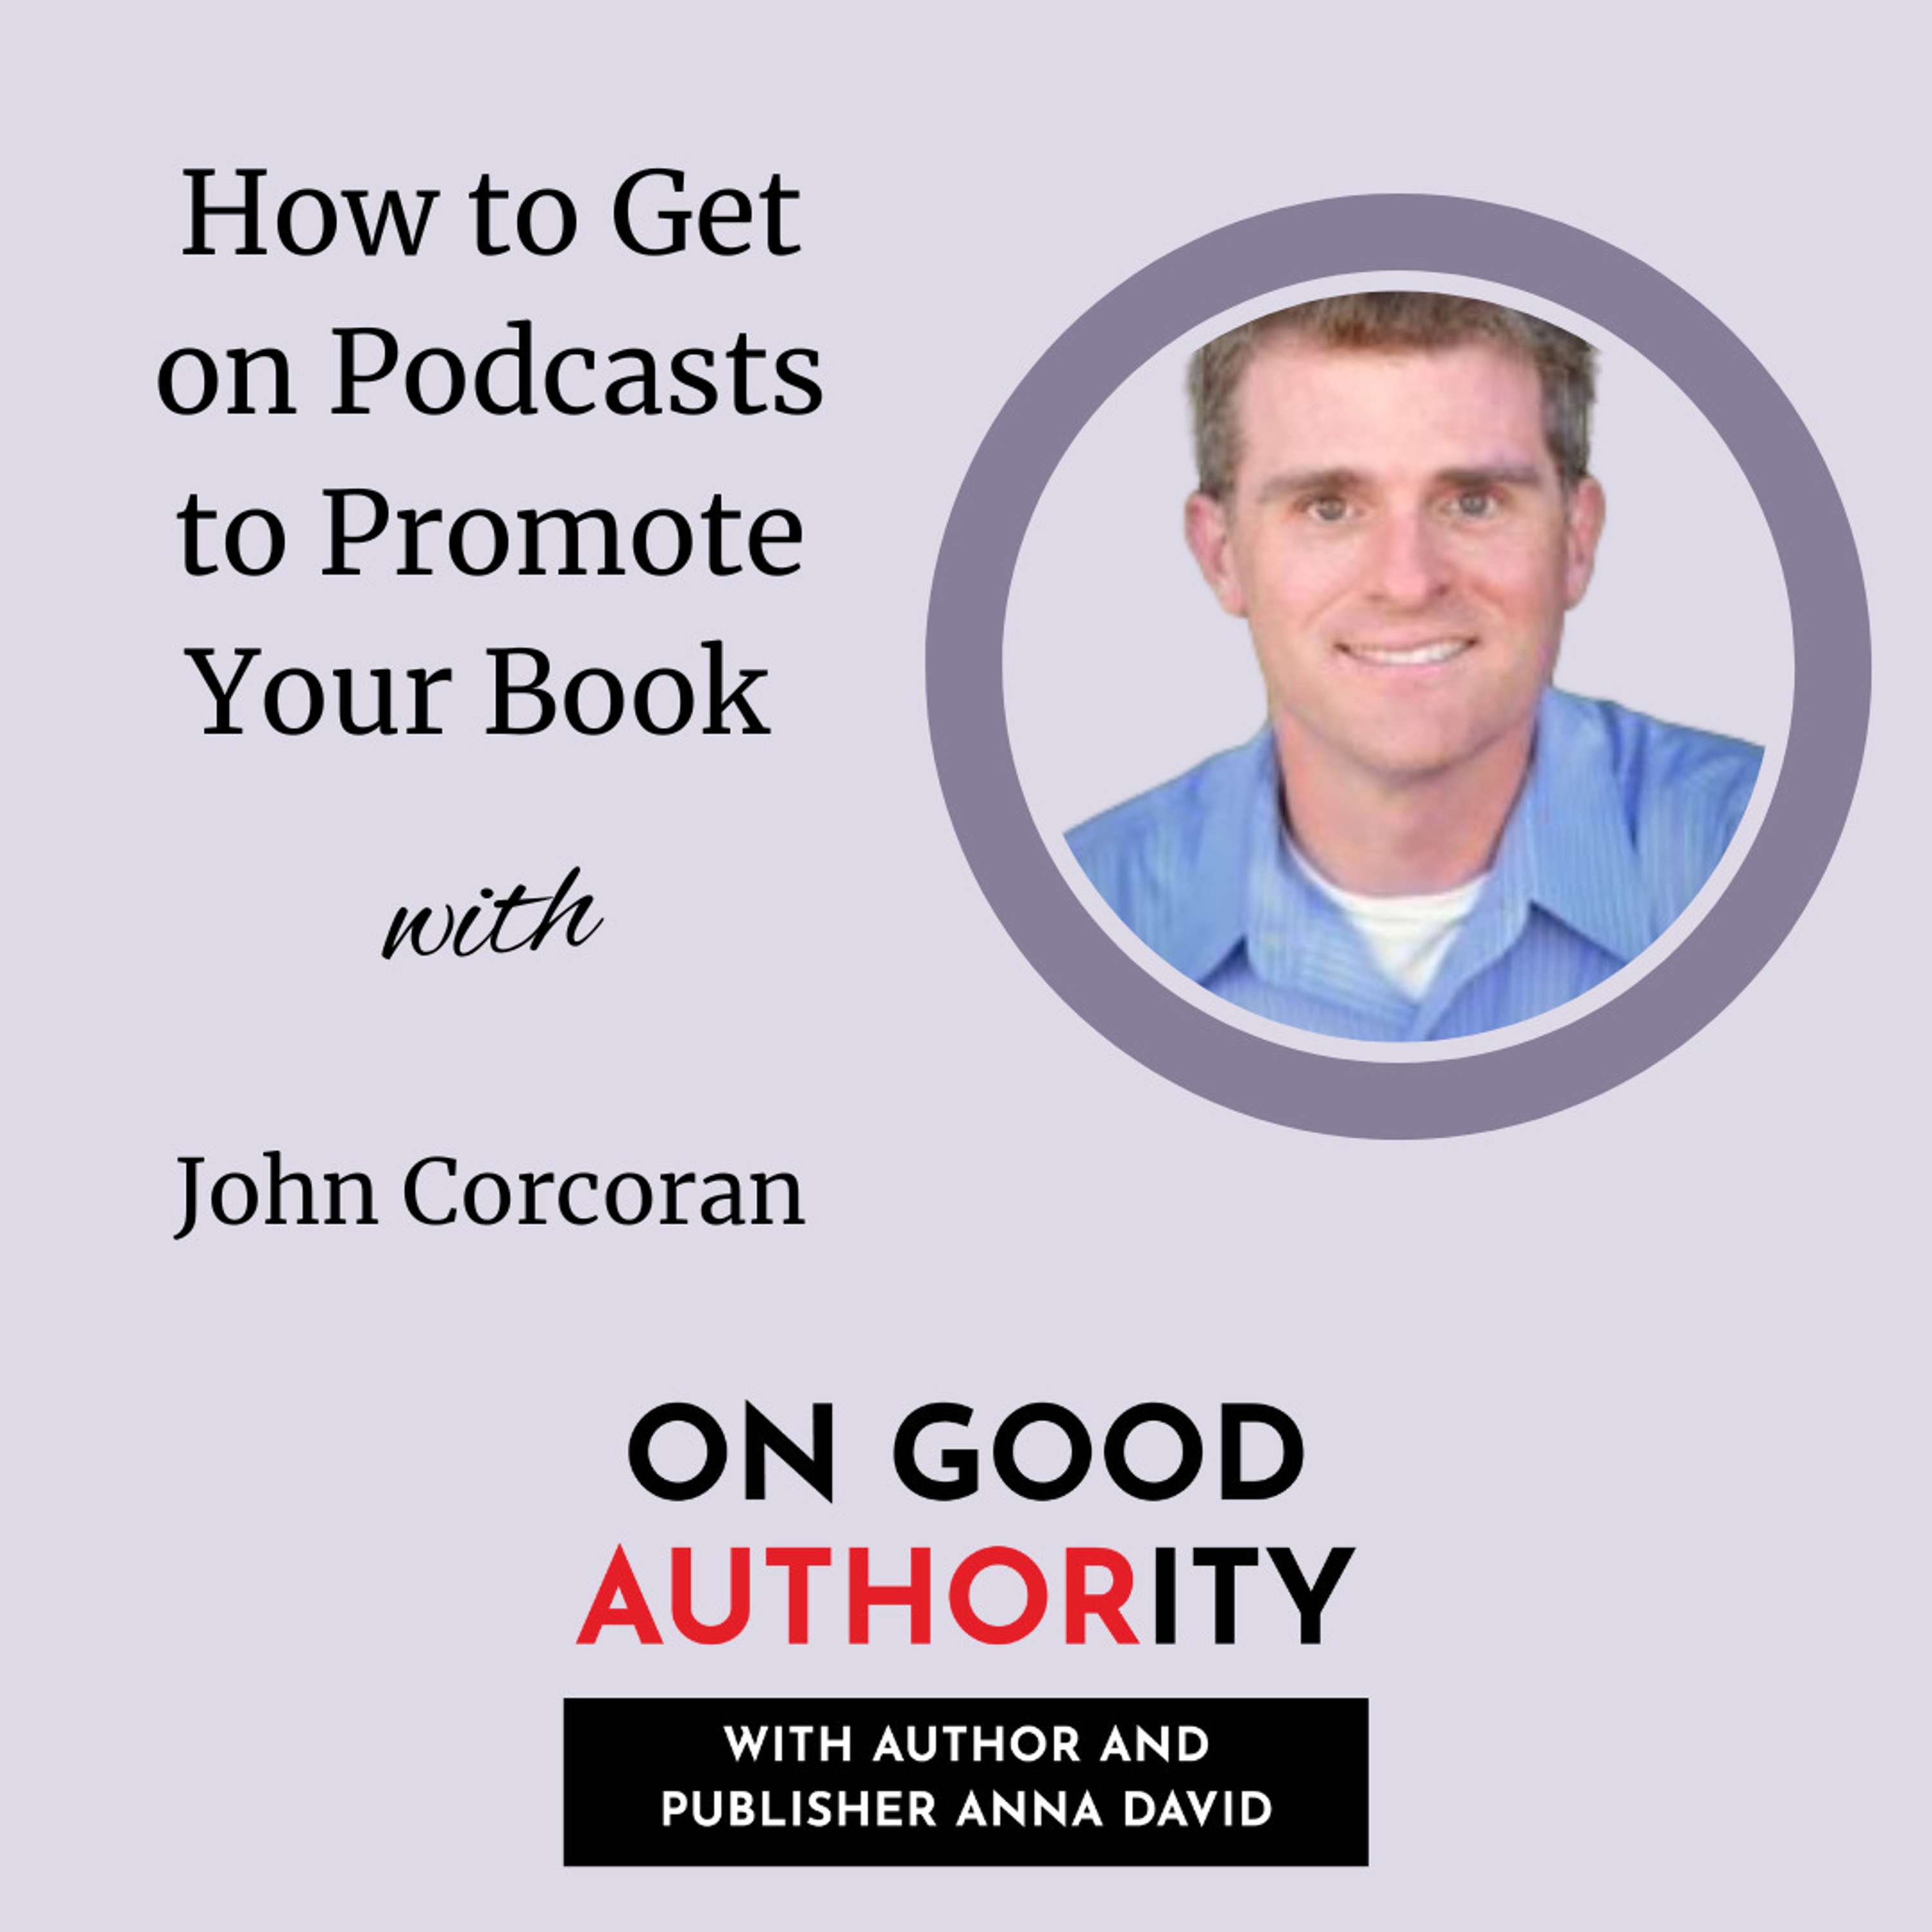 How to Get on Podcasts to Promote Your Book with John Corcoran